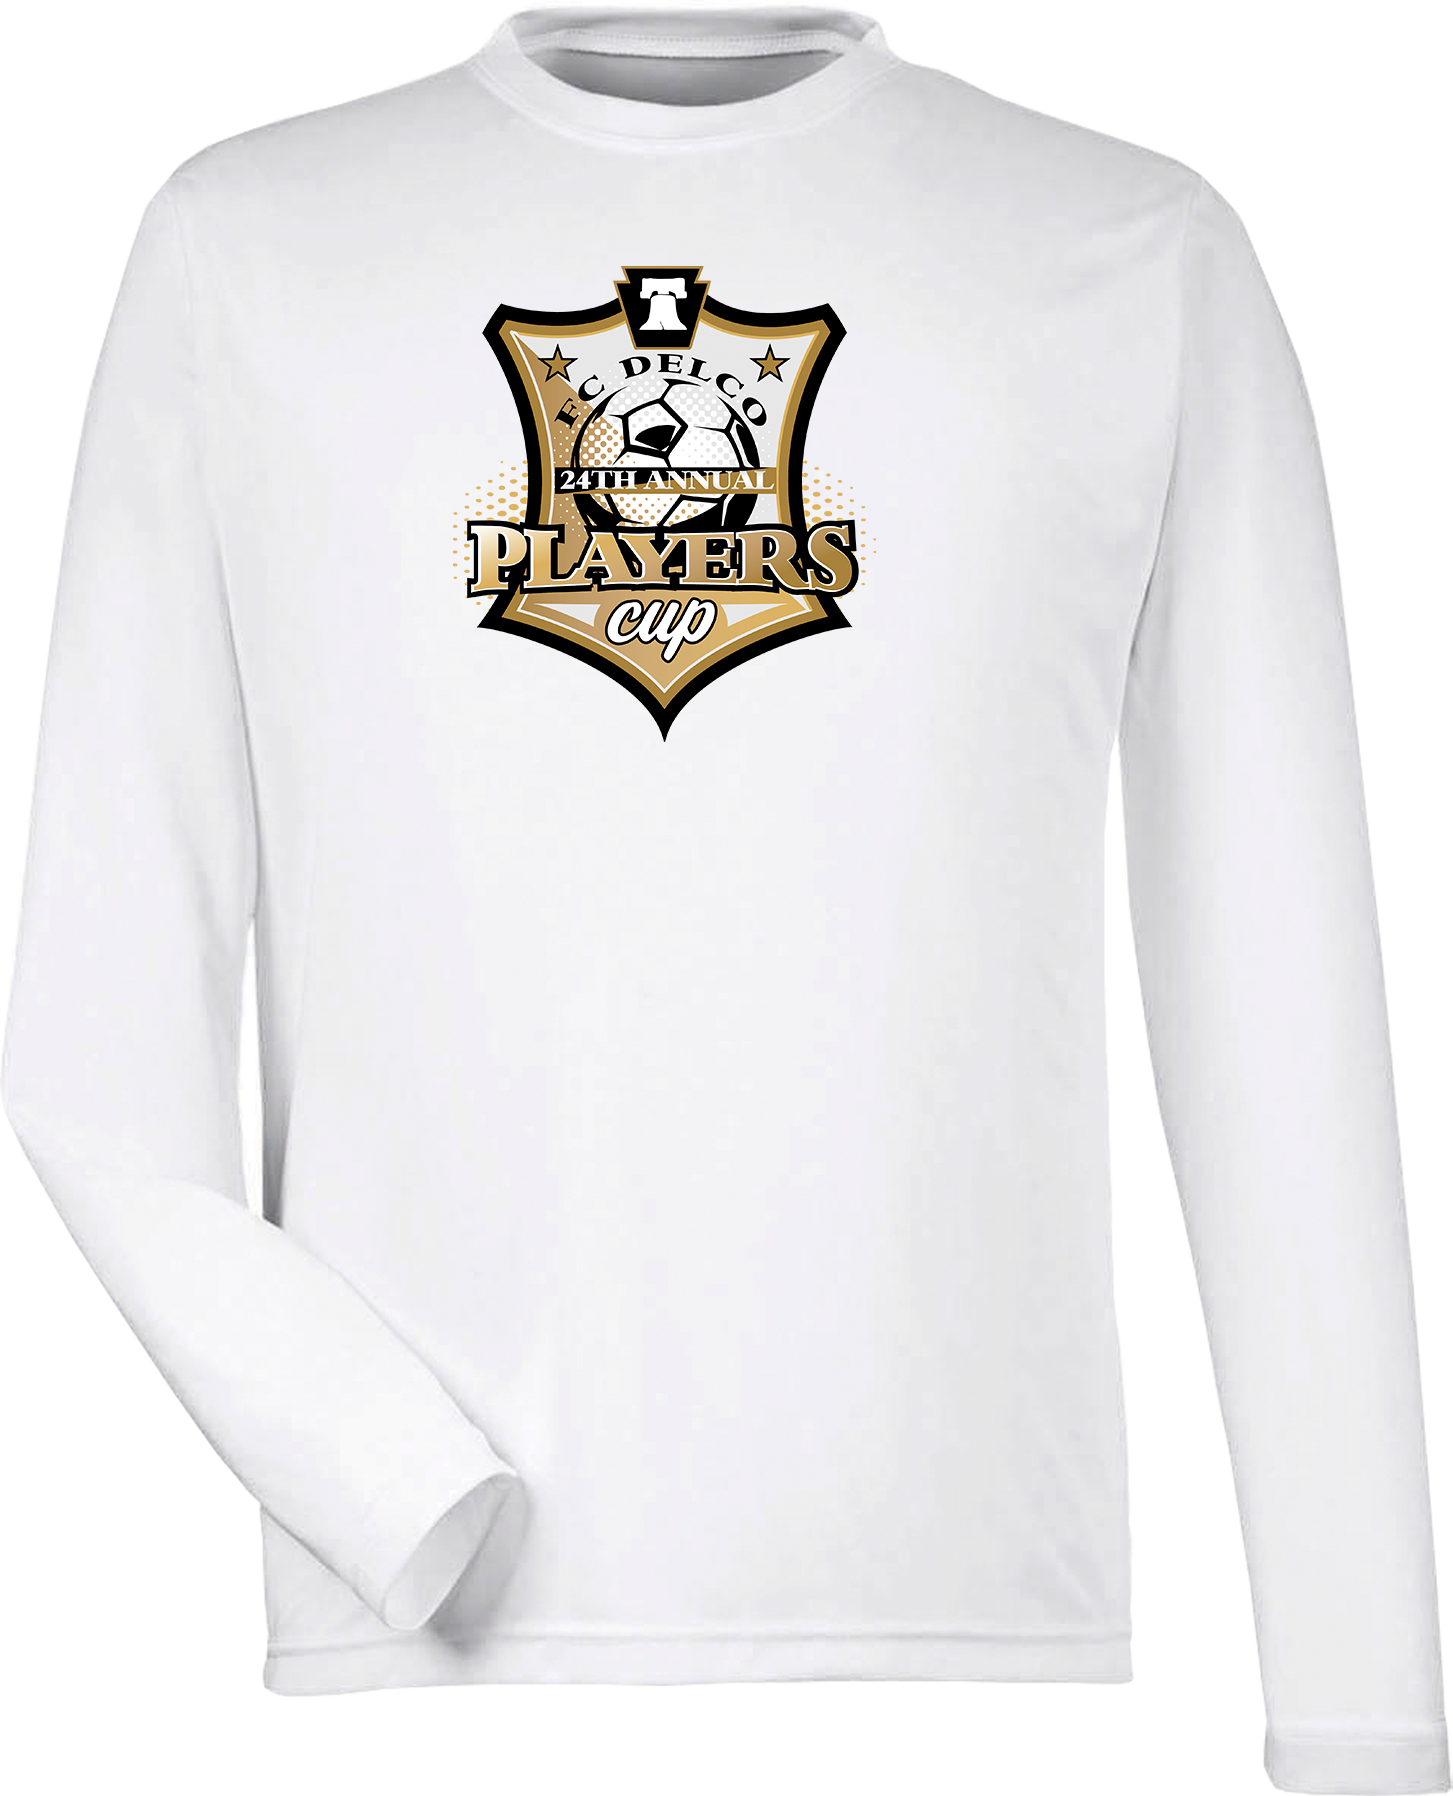 PERFORMANCE SHIRTS - 2023 FC DELCO Players Cup